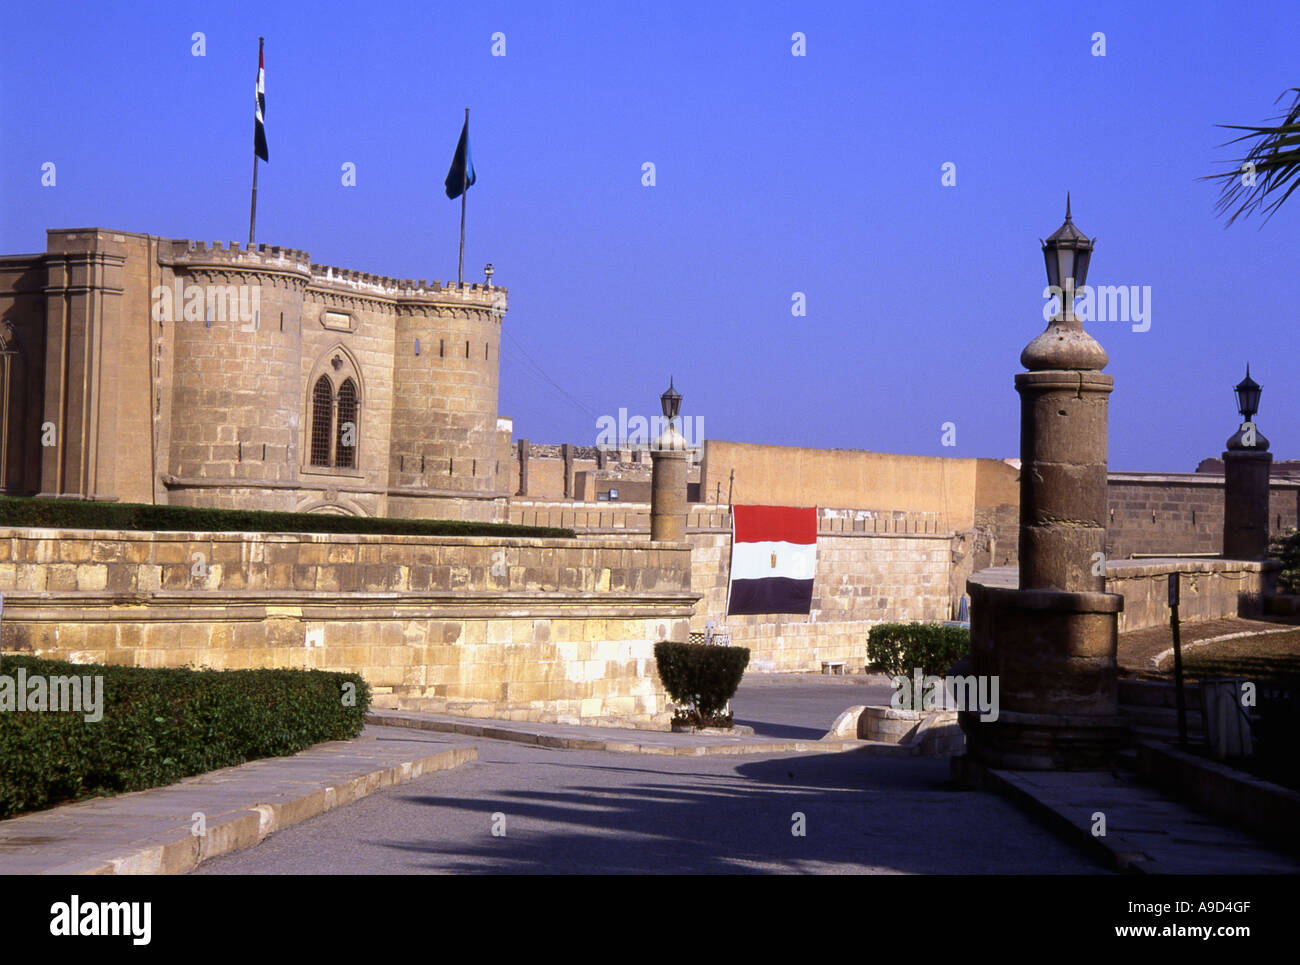 Characteristic View of the Citadel Saladin Cairo Arabic Arab Republic of Egypt Egyptian North Africa African Middle East Stock Photo